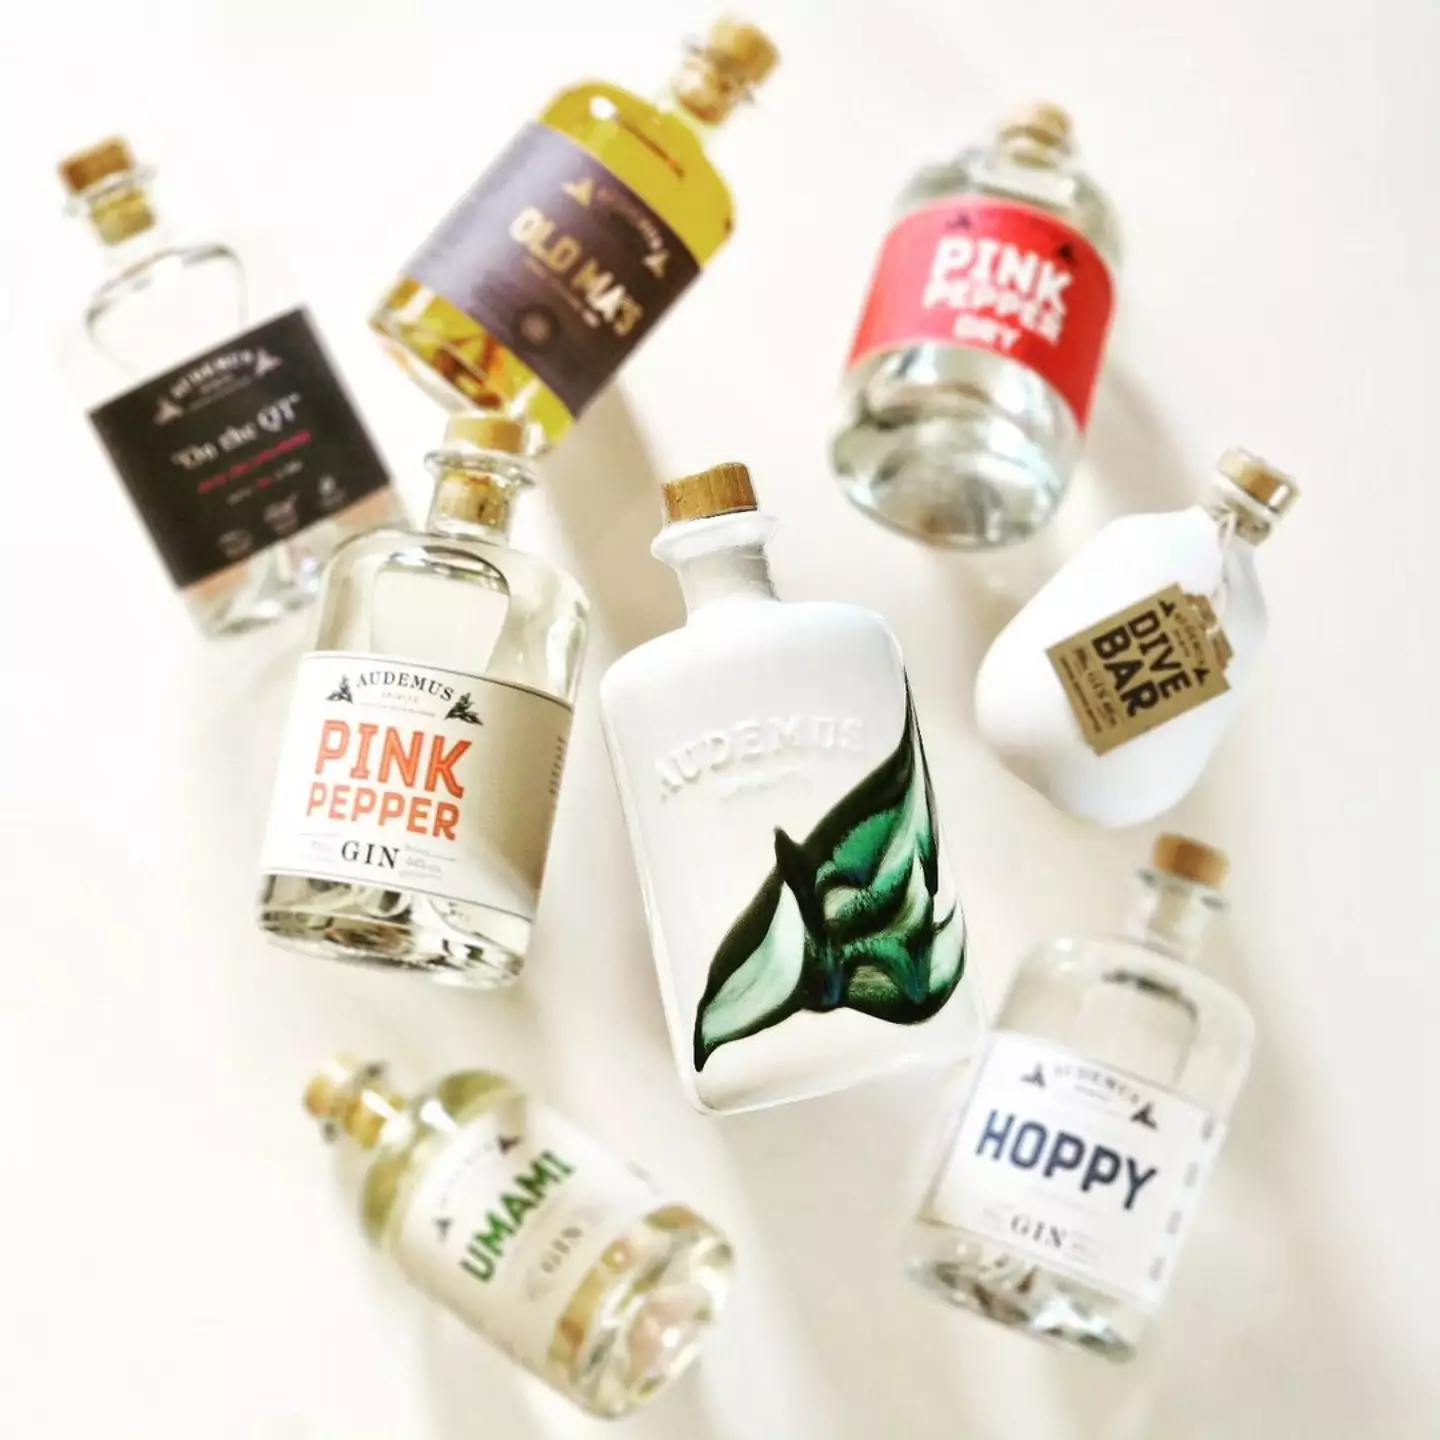 The brand also have a range of different spirits.